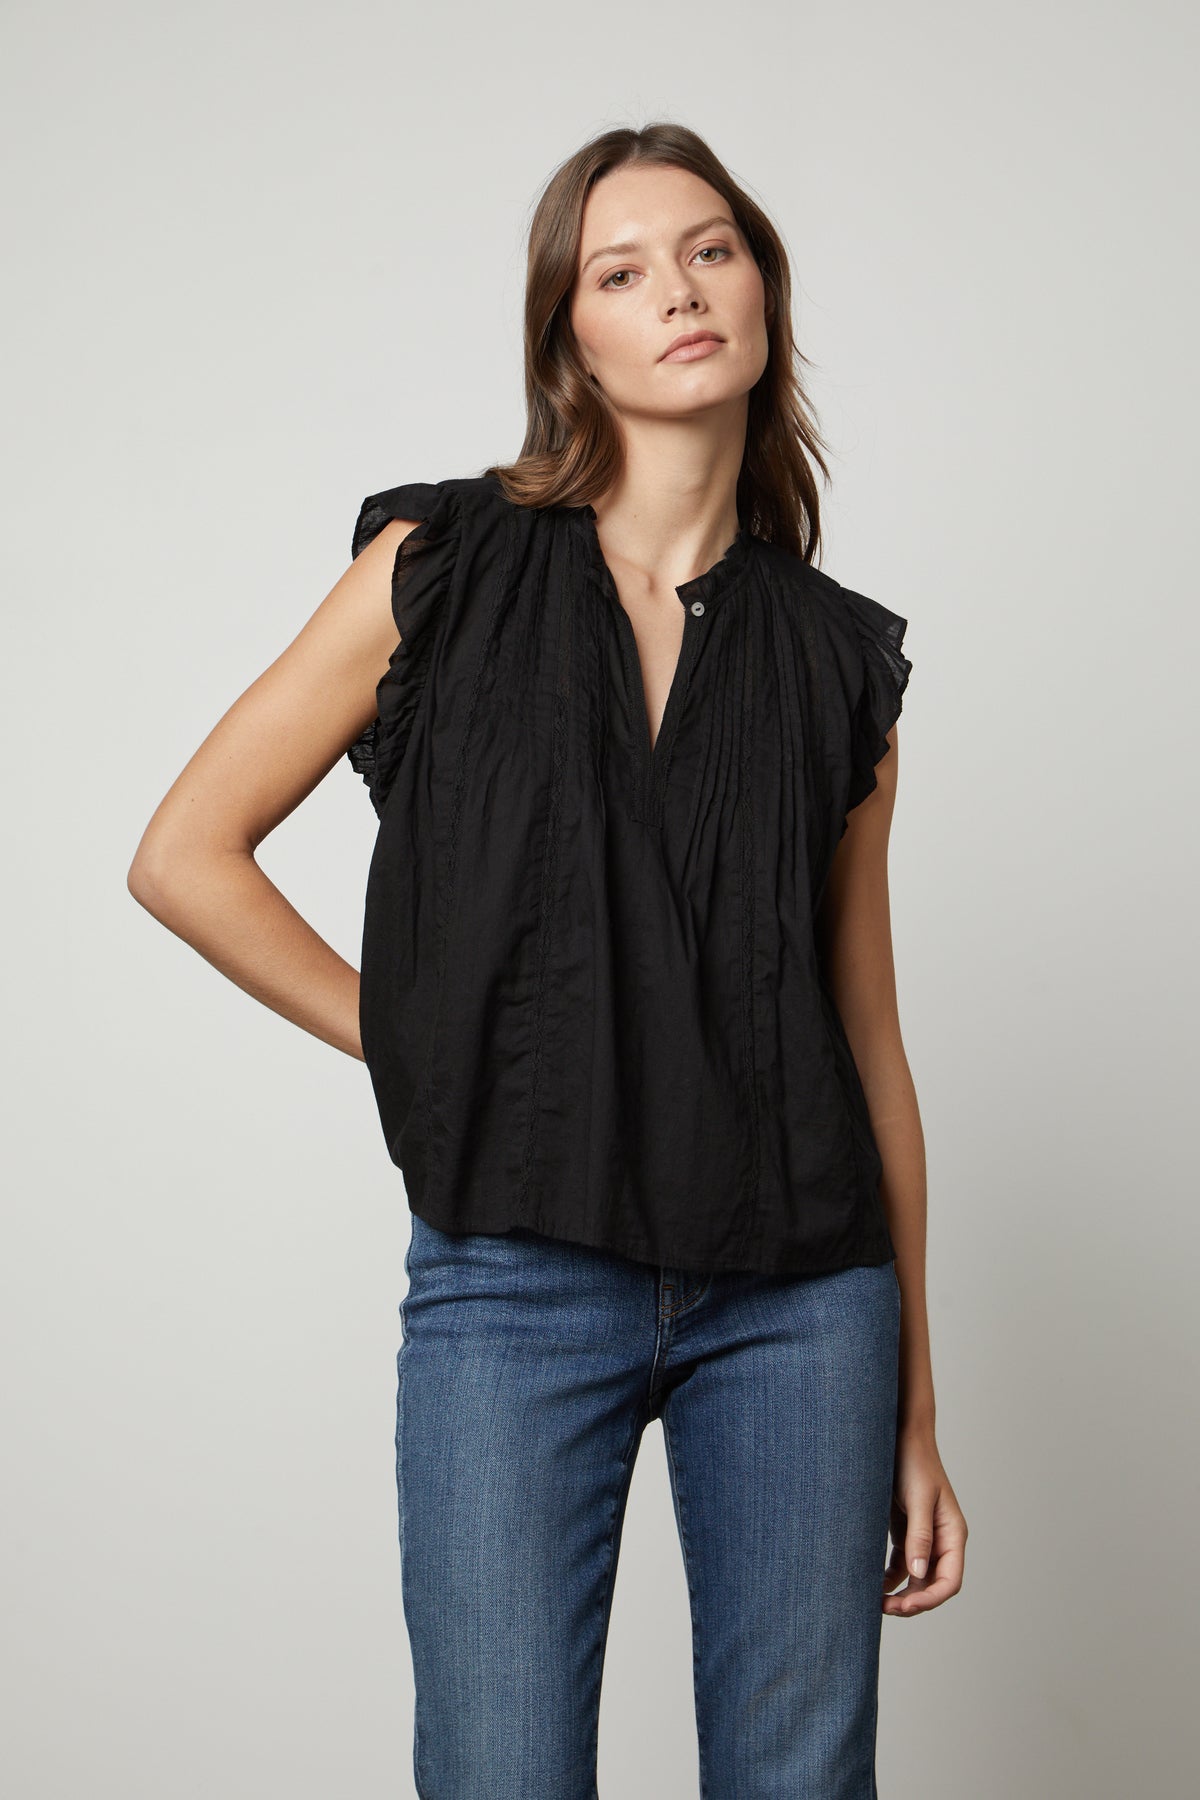 The model is wearing a LIANA LACE TANK TOP from Velvet by Graham & Spencer with ruffled sleeves.-26834989547713